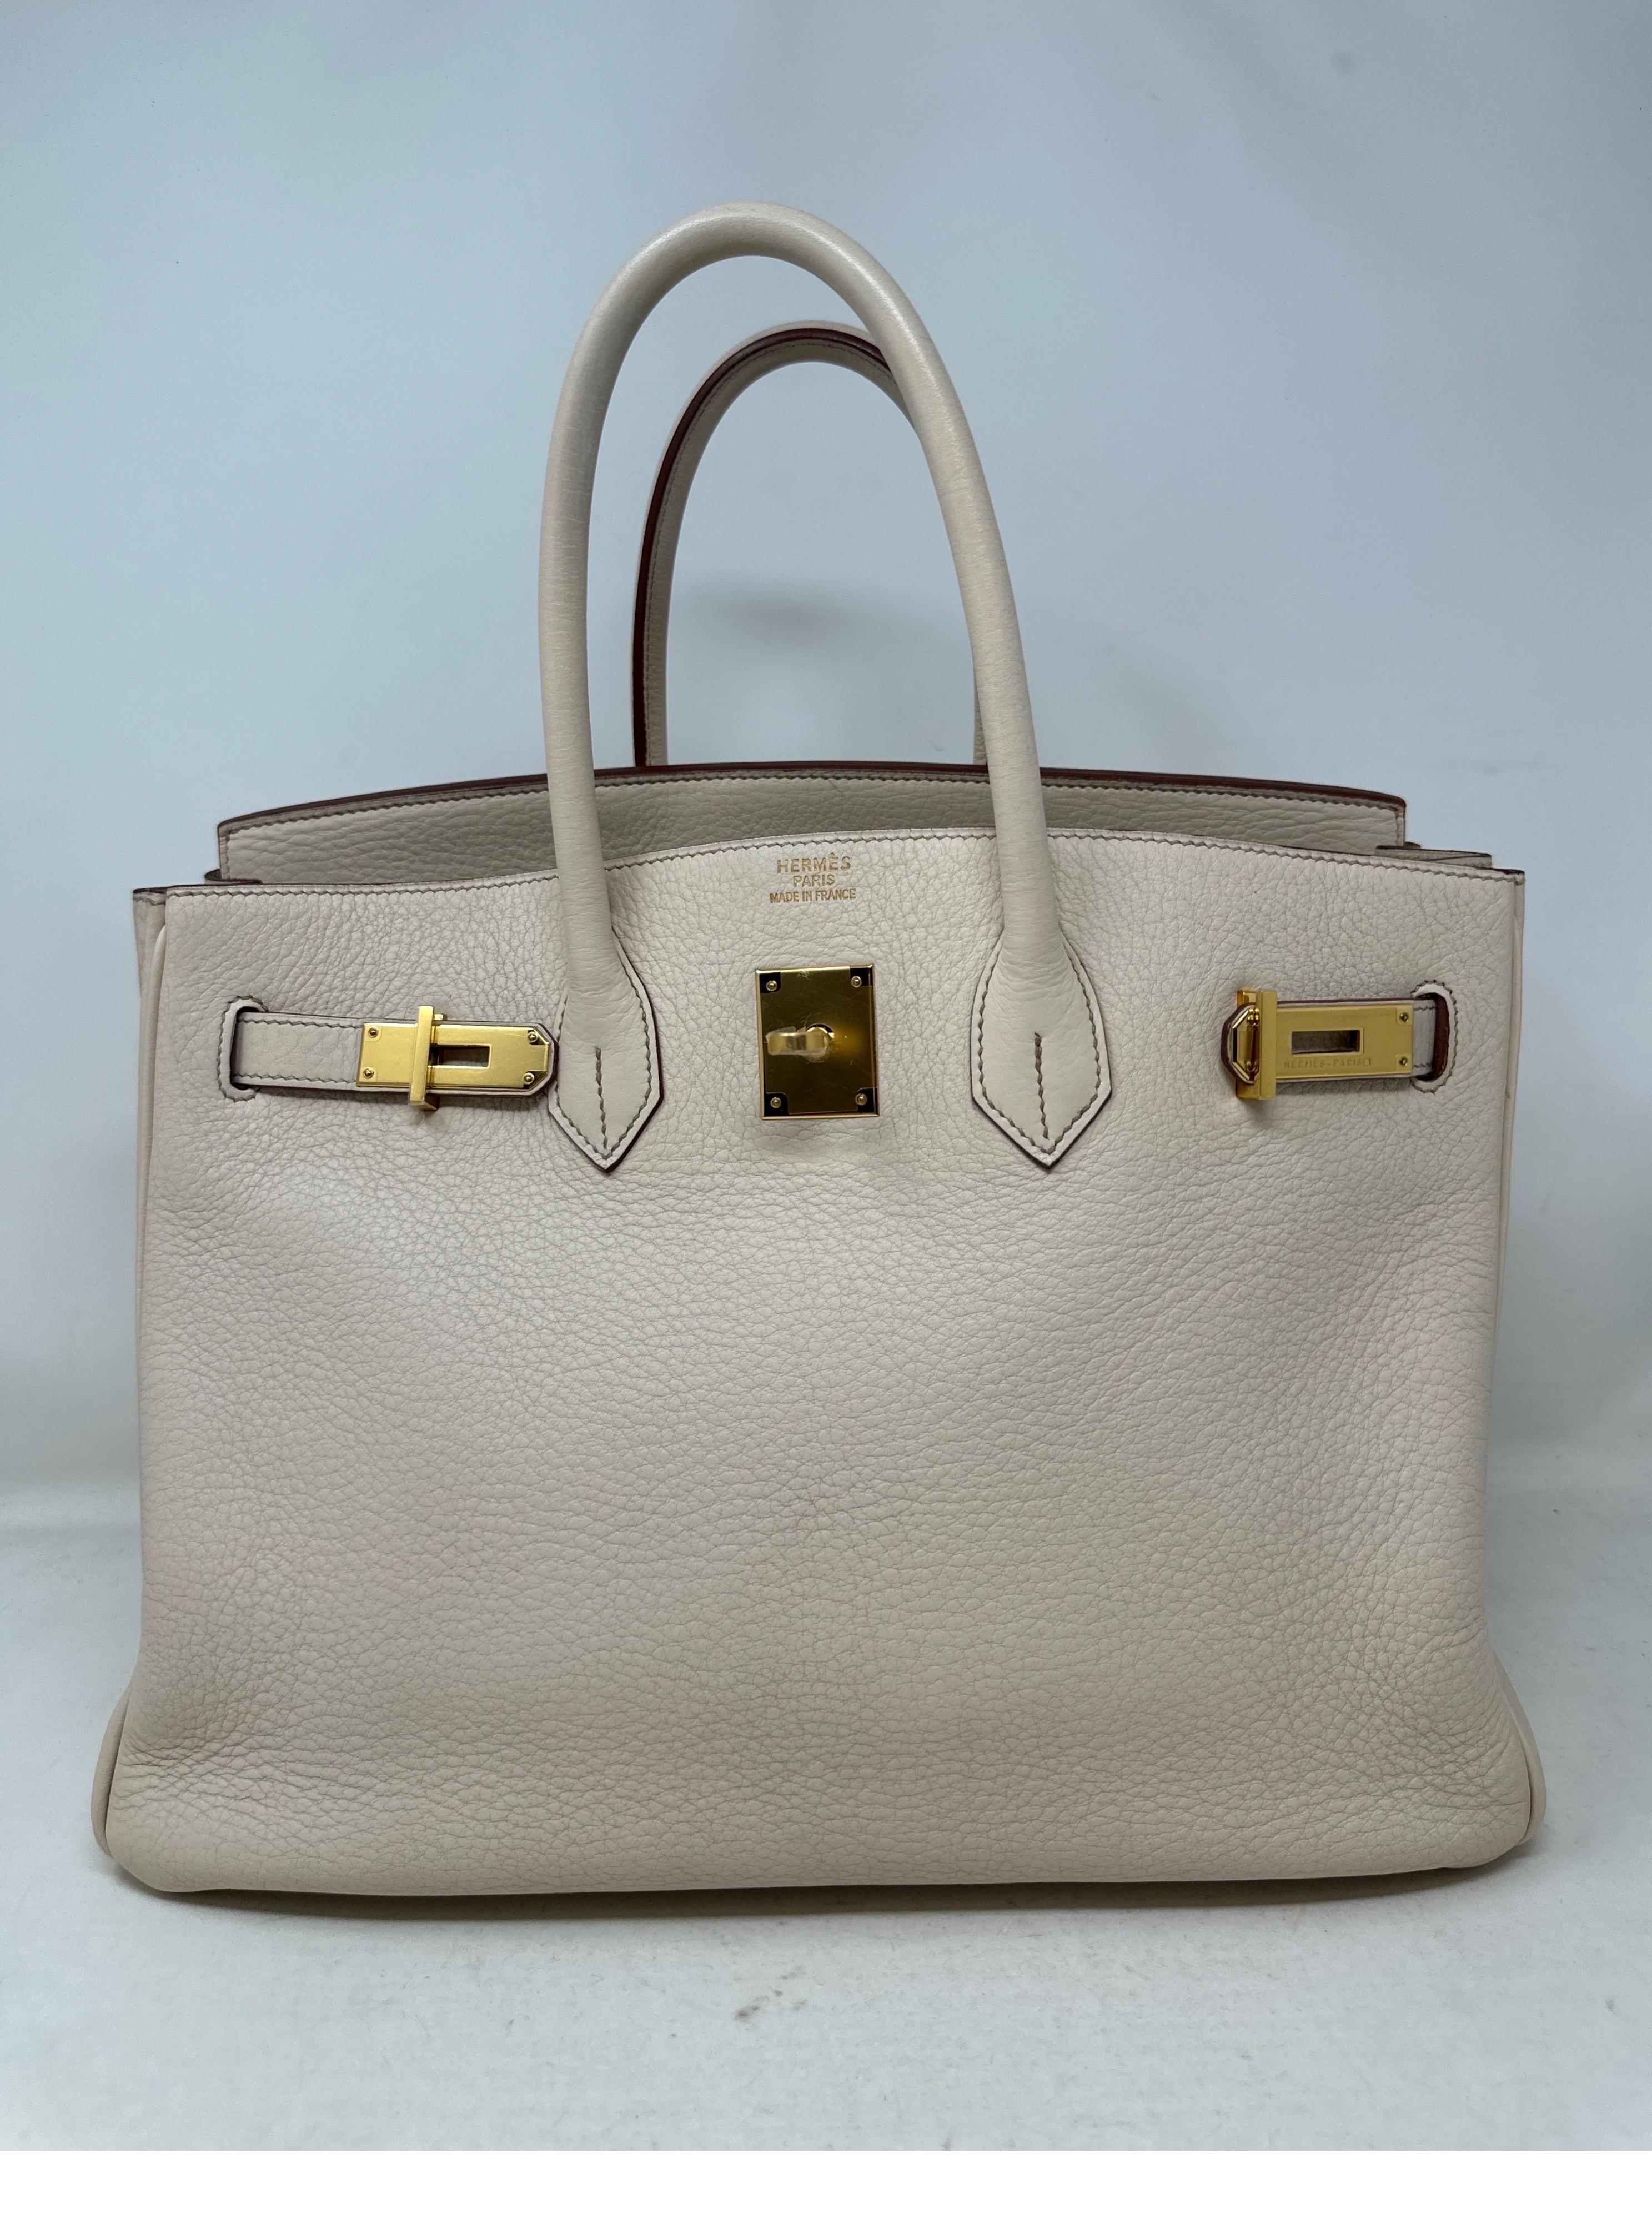 Hermes Beige Birkin 35 Bag. Gold hardware. Beige color Birkin clemence leather. Excellent condition. Interior clean. Hard to find neutral color. Includes clochette, lock, keys, and dust bag. Guaranteed authentic. 